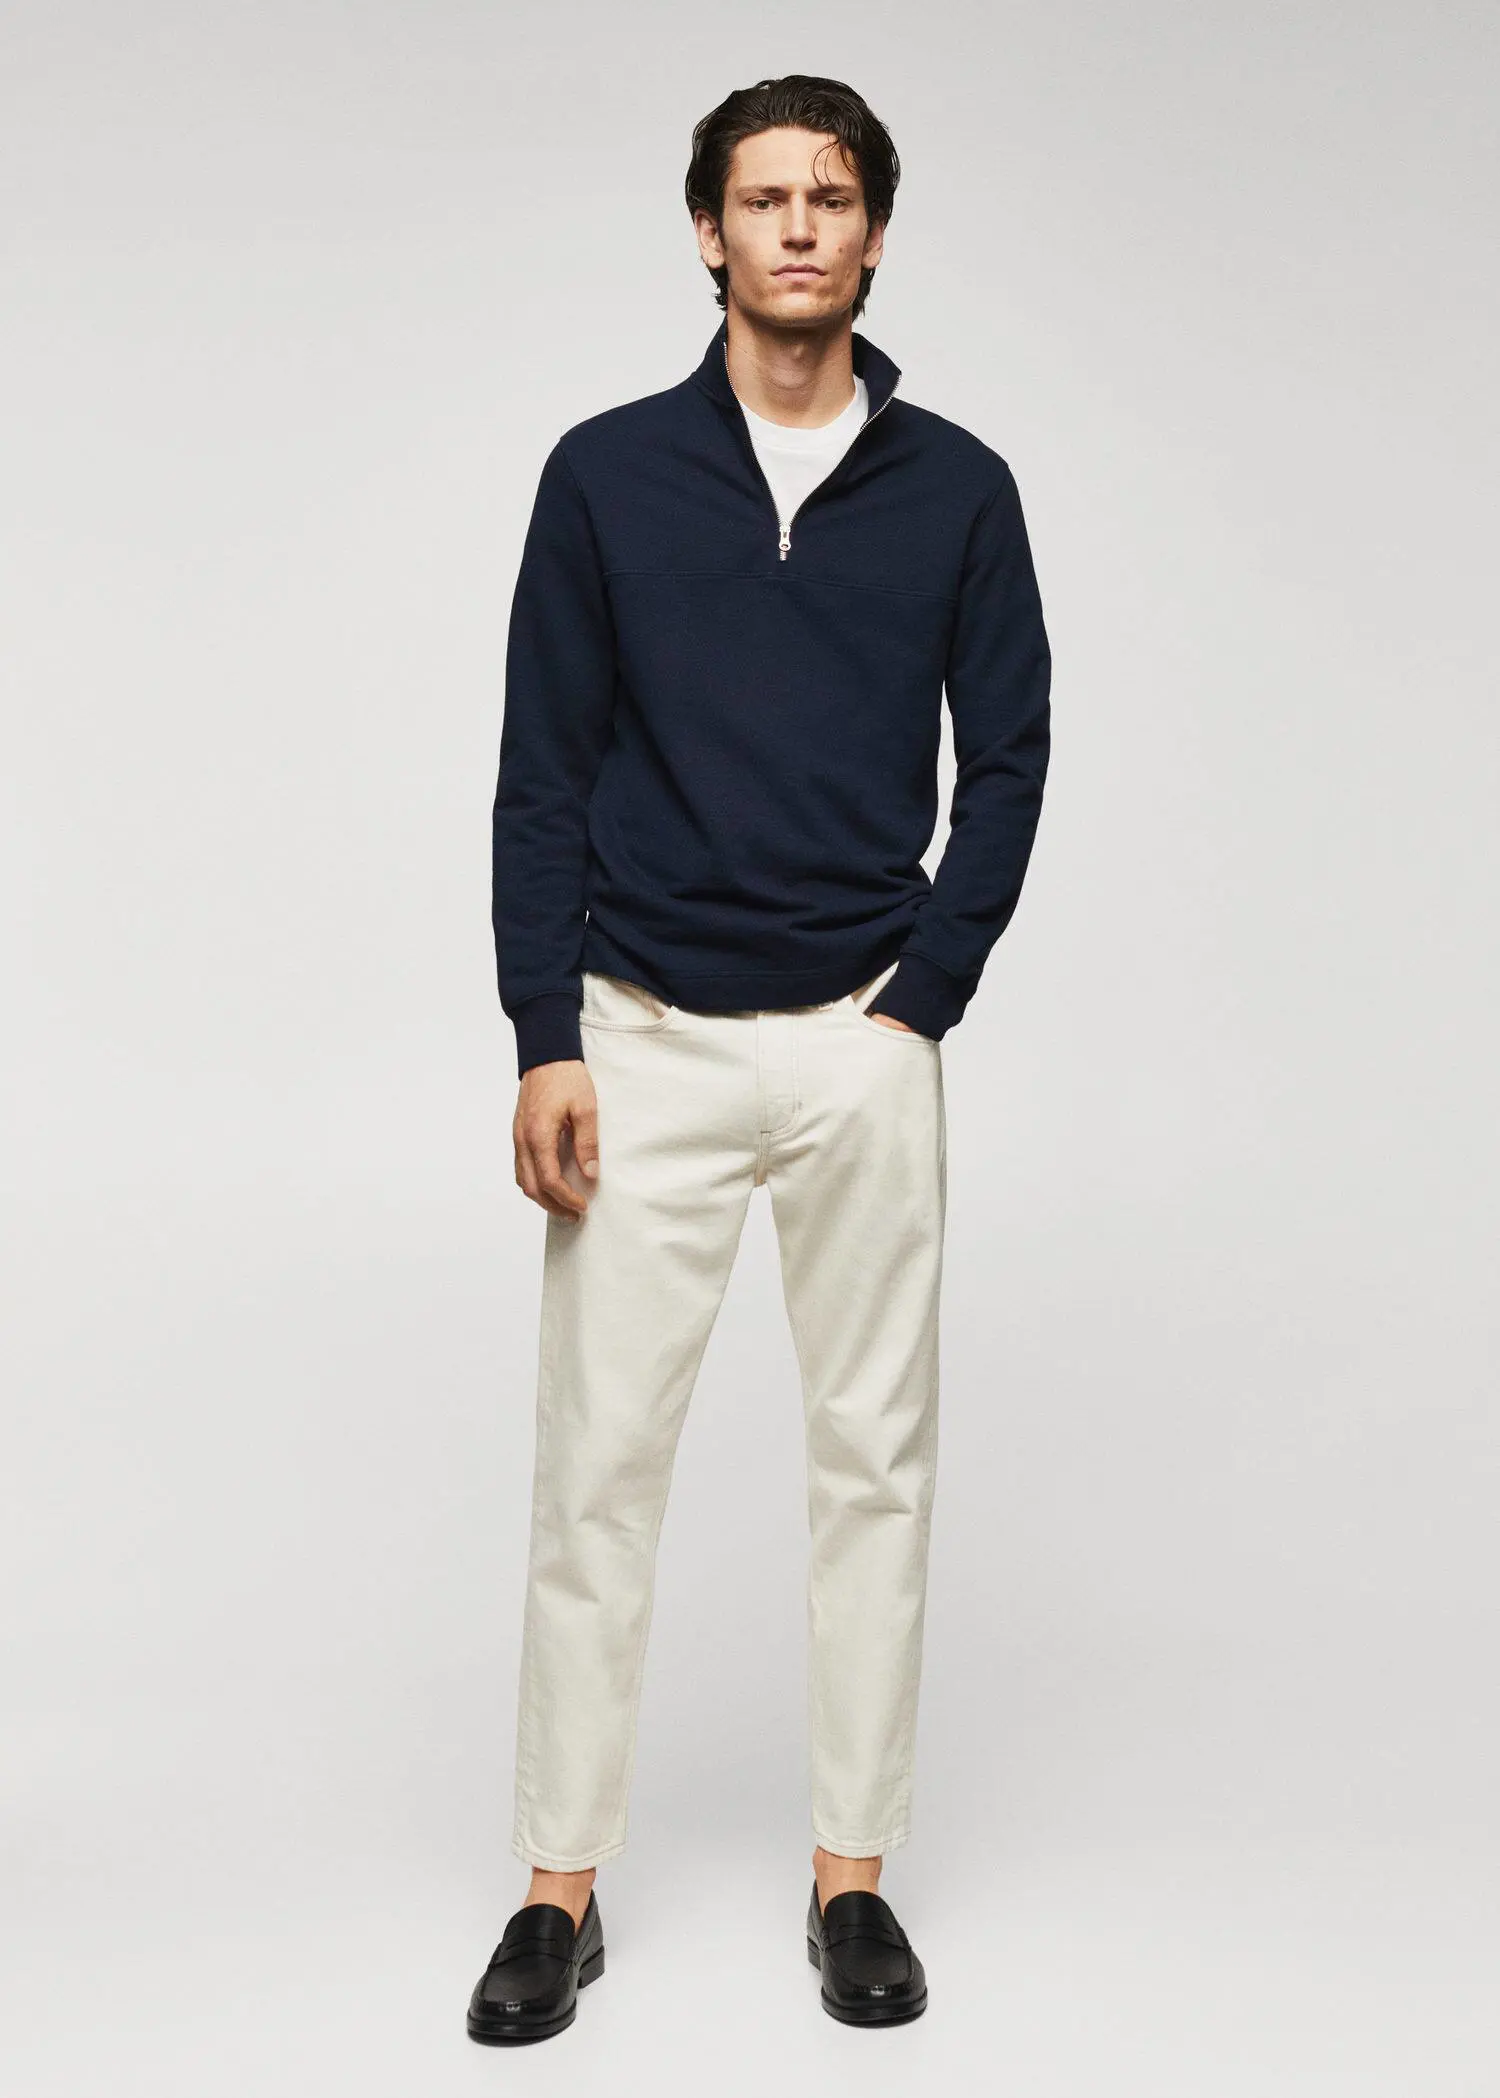 Mango Cotton sweatshirt with zipper neck. a man in a navy blue sweater and white pants. 